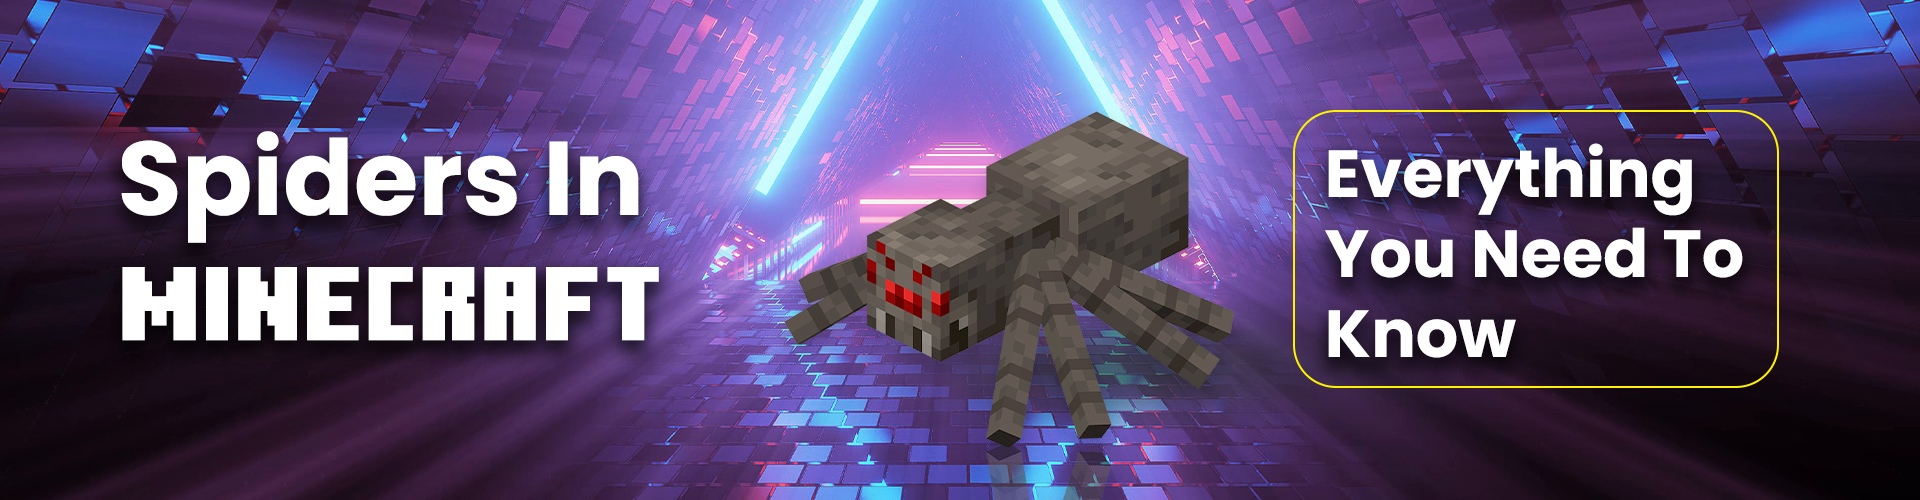 Spiders In Minecraft - Everything You Need To Know